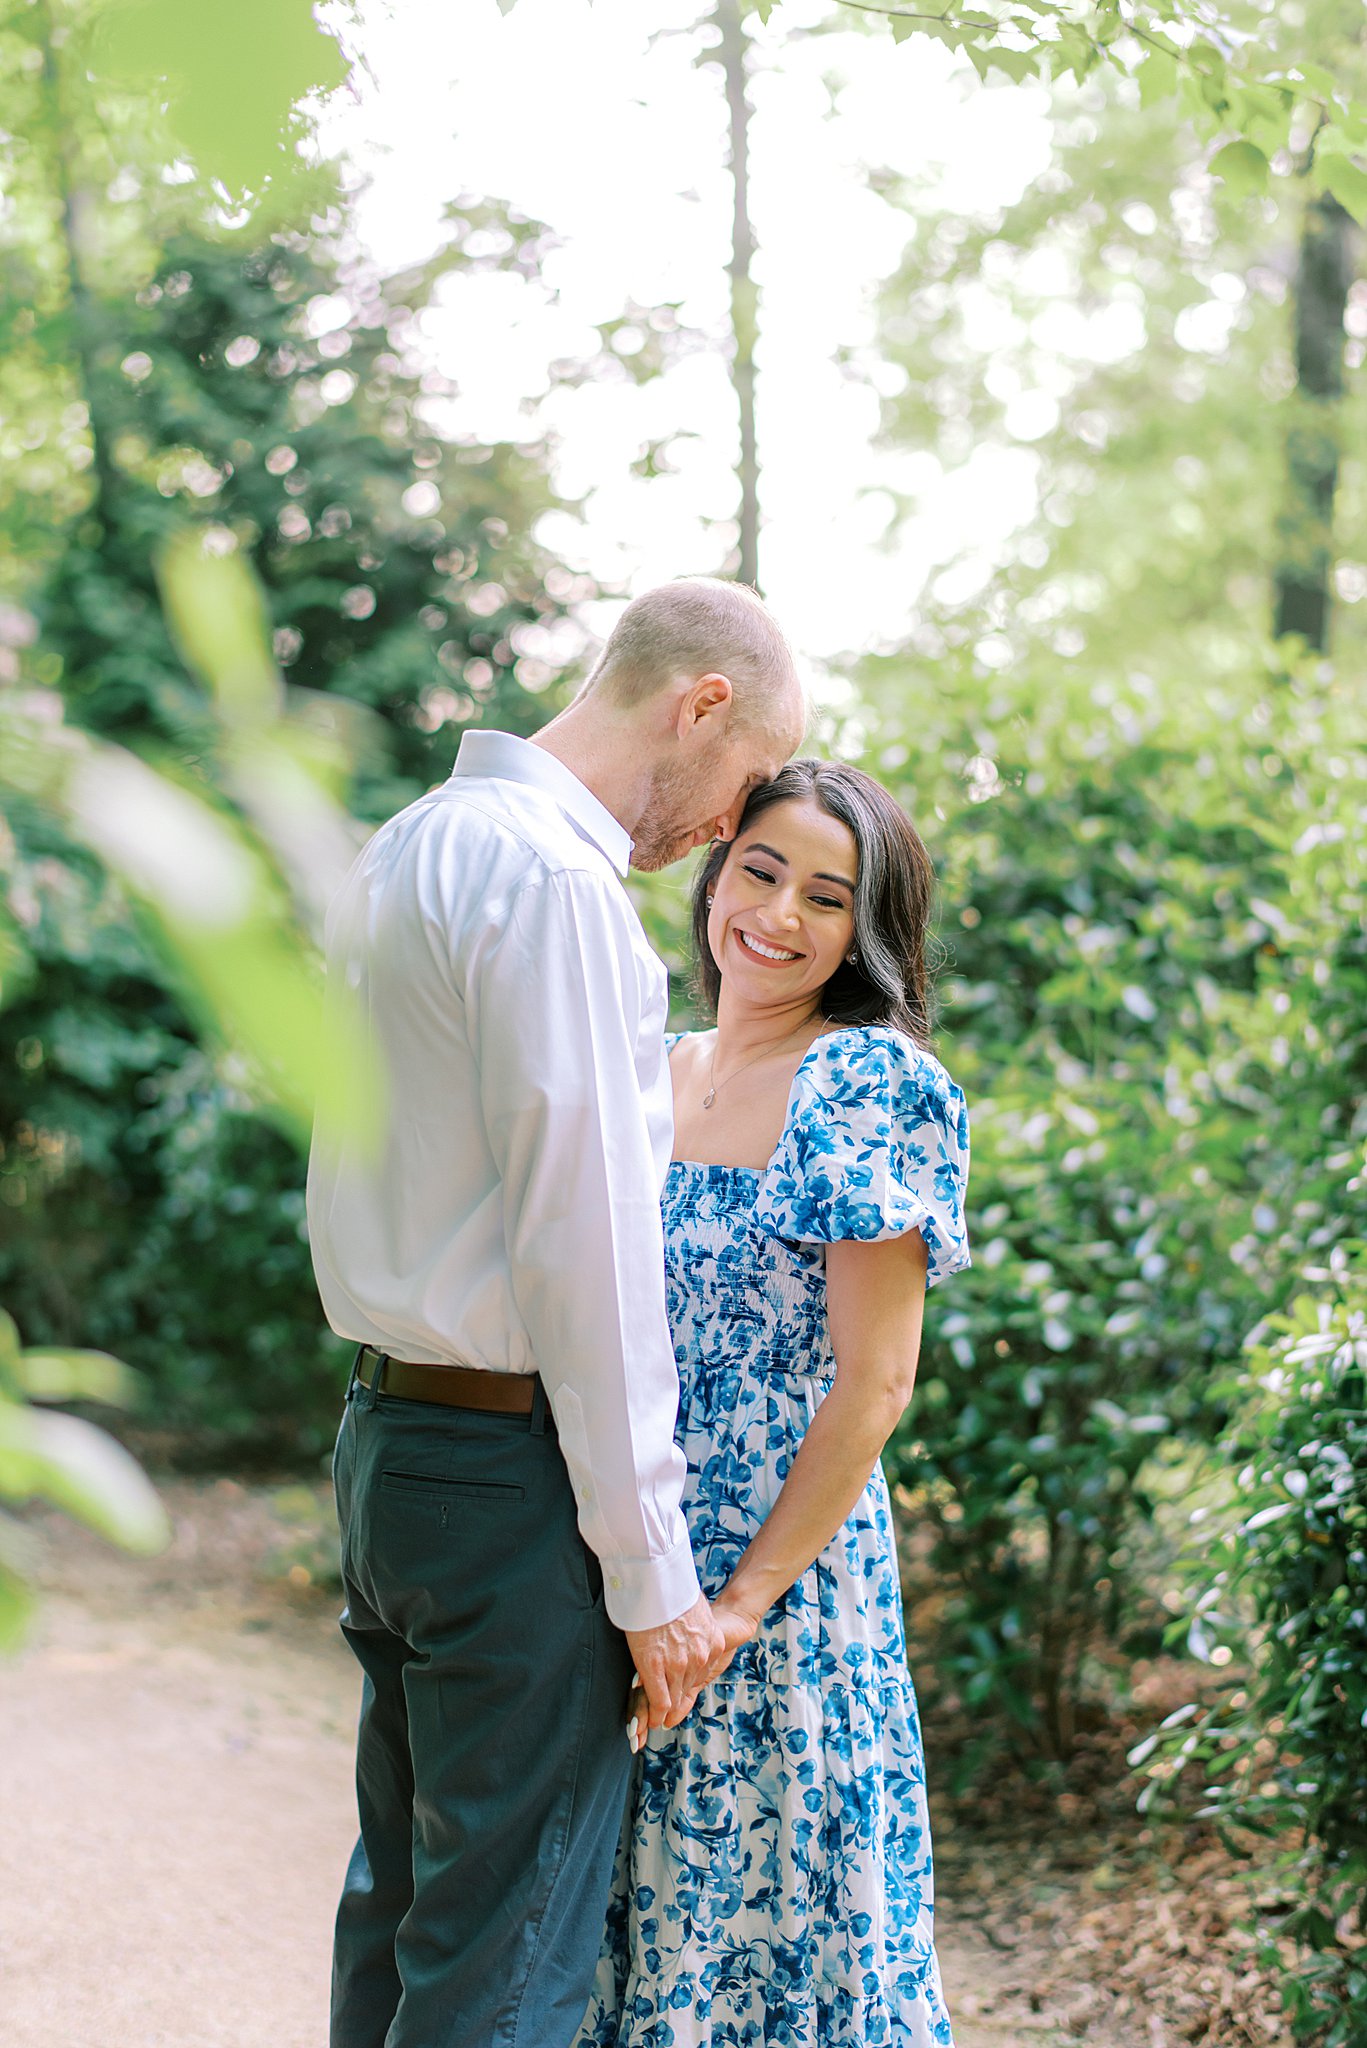 Newlyweds embrace while in a thick garden path